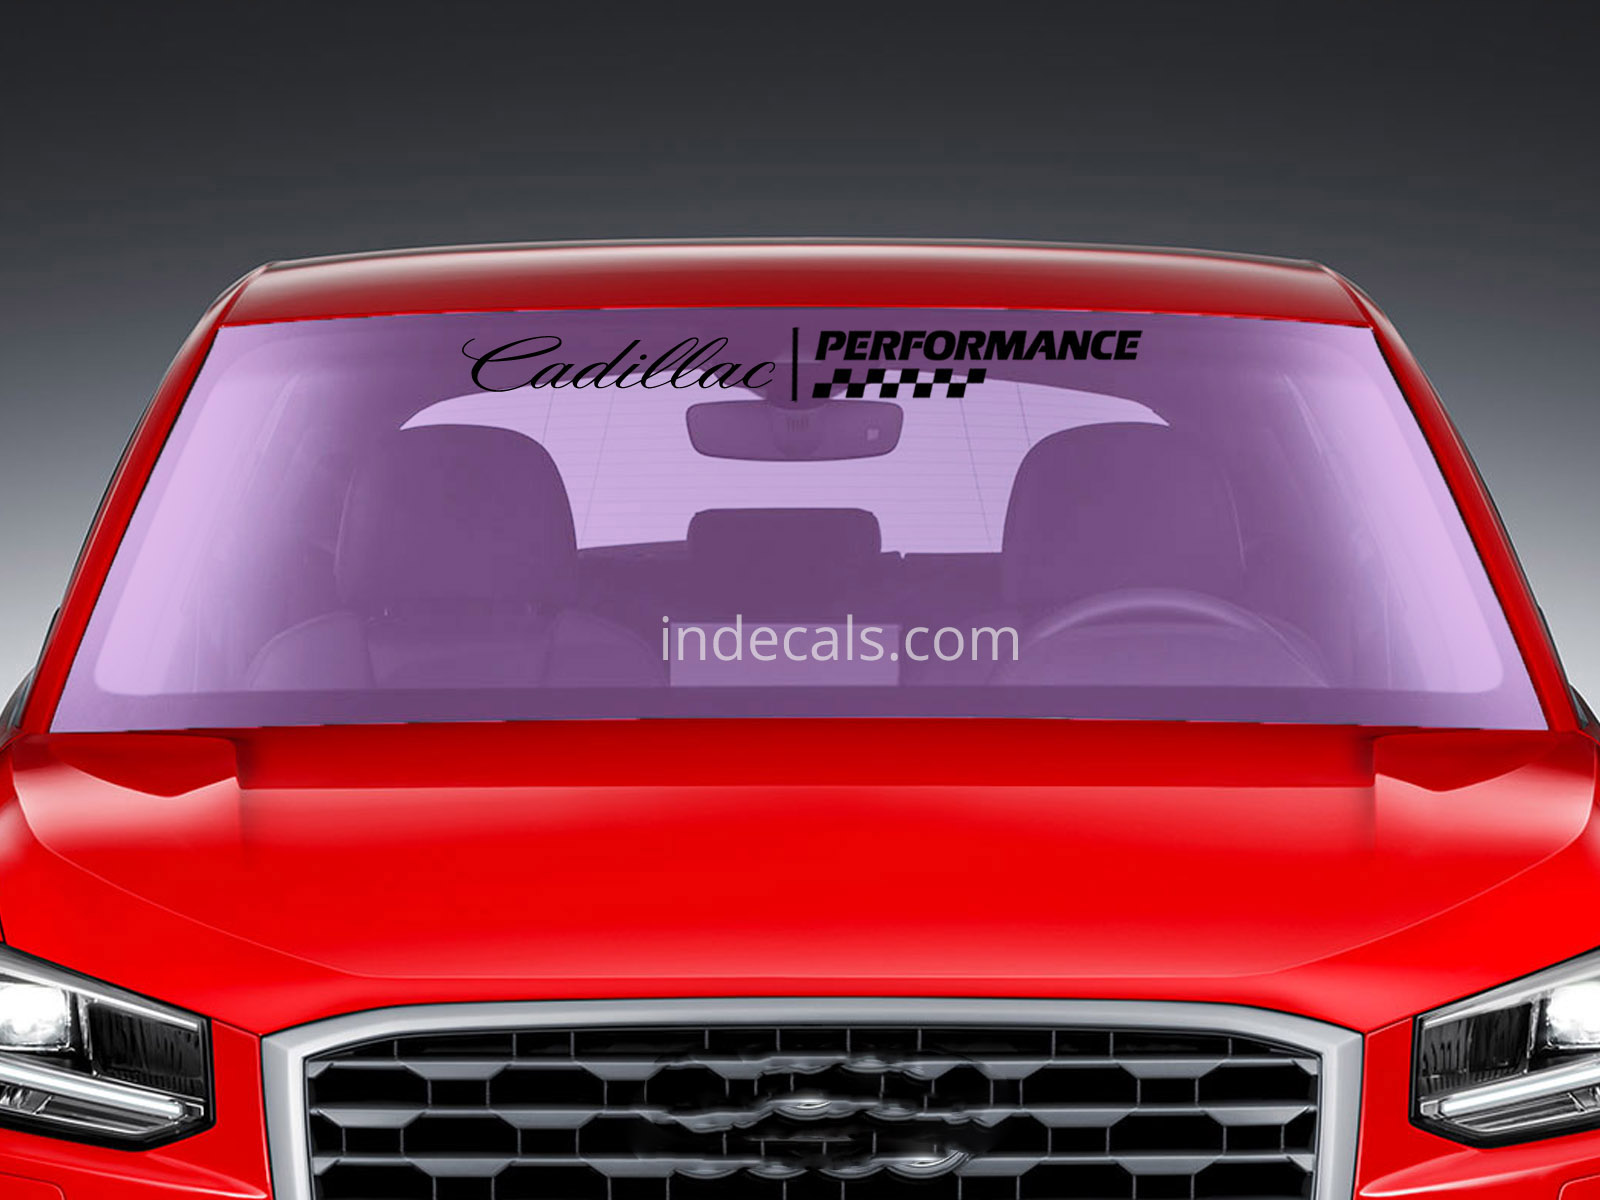 1 x Cadillac Performance Sticker for Windshield or Back Window - Black